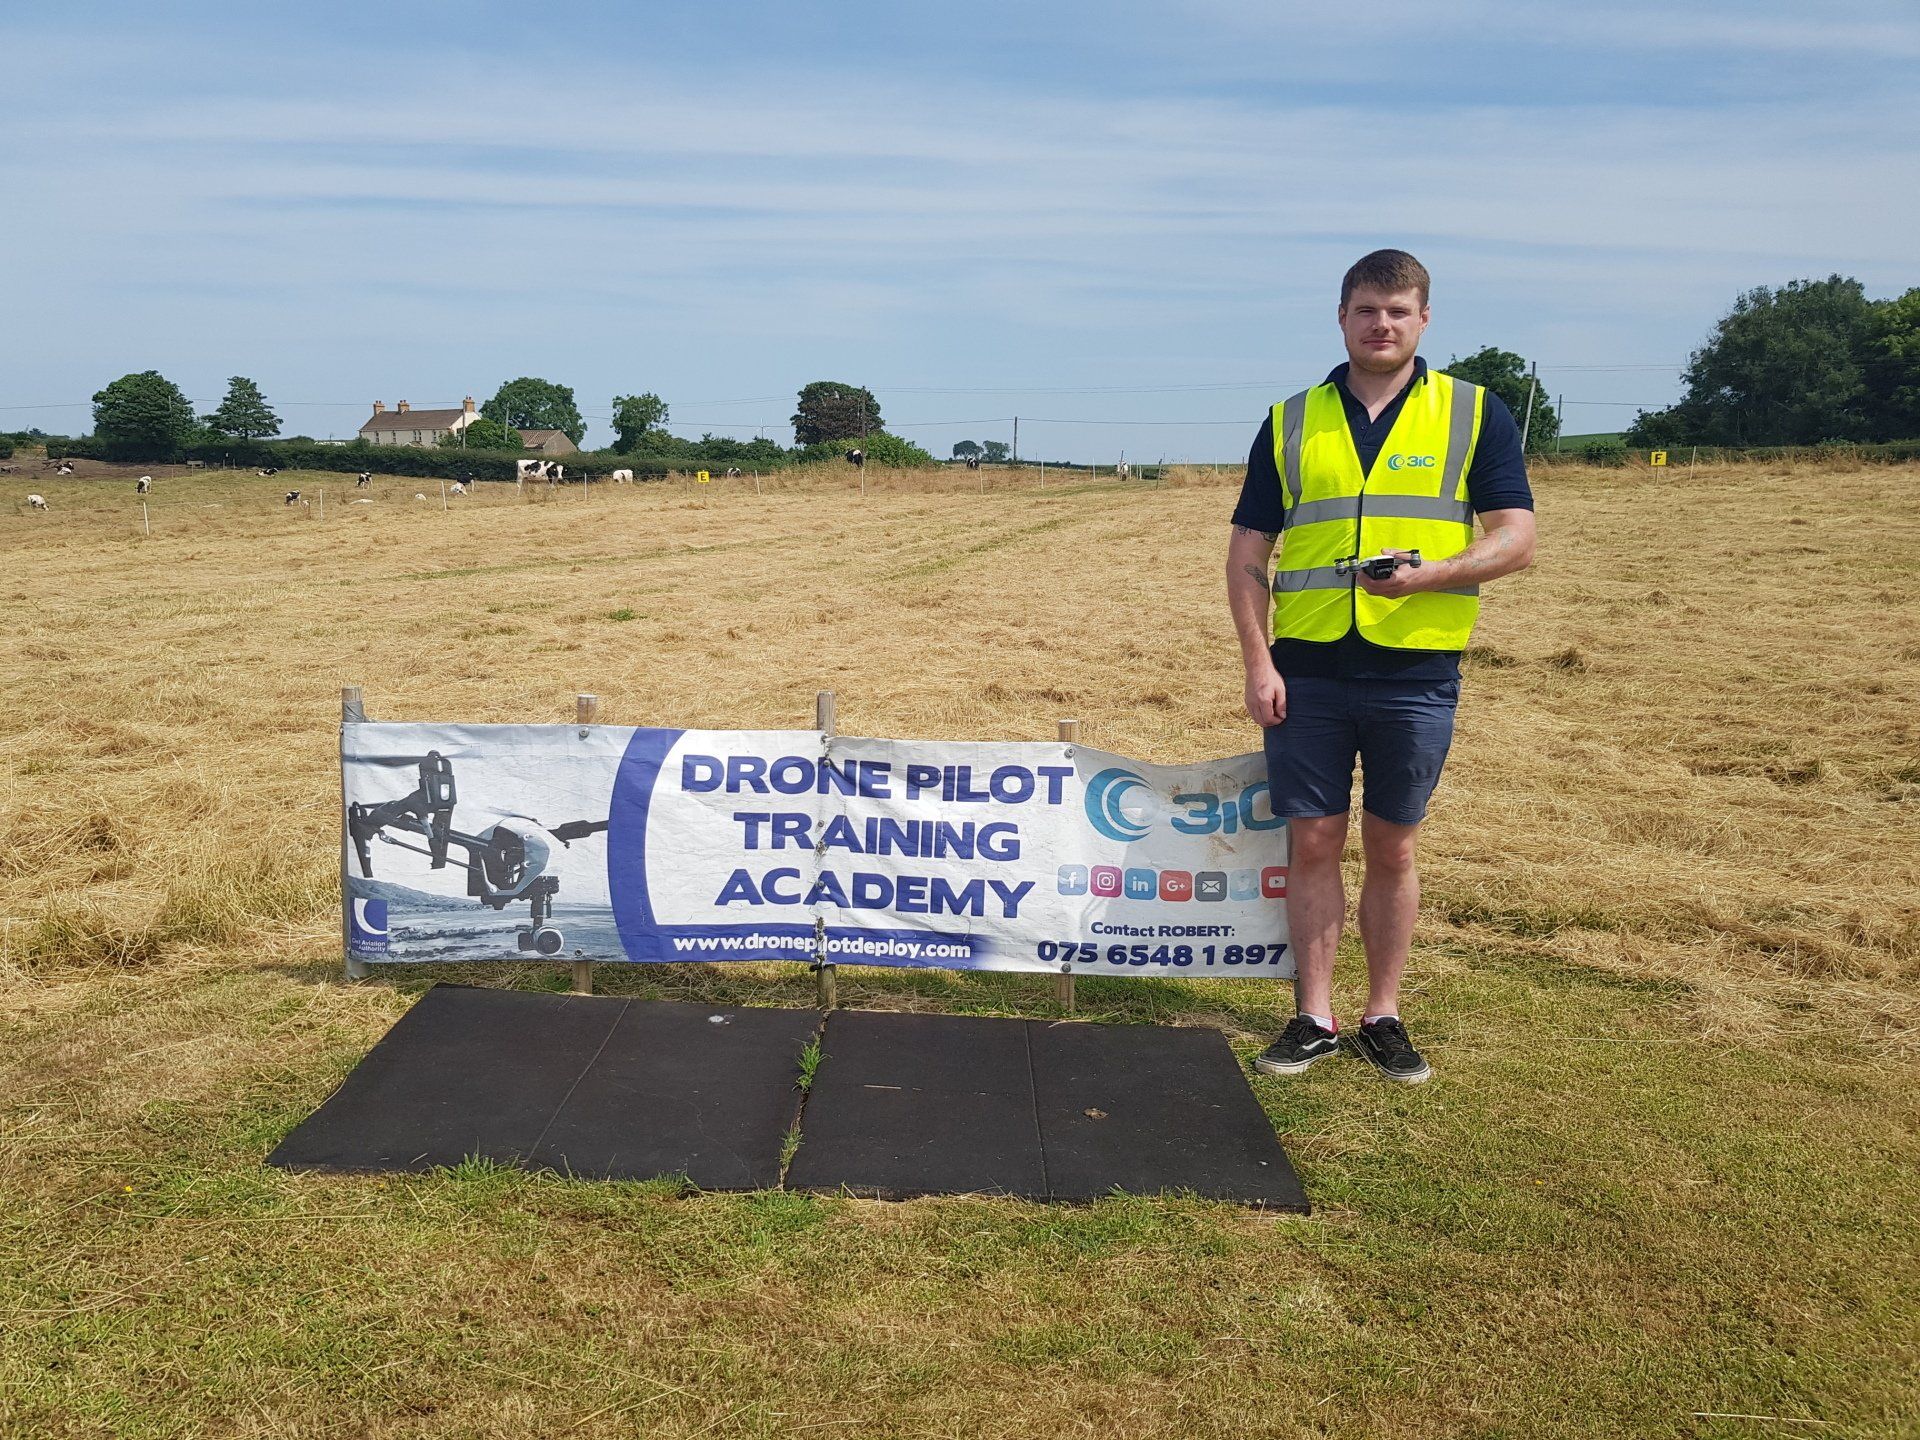 Zac from Jacopa Ltd who successfully passed his A2 CofC atDrone Pilot Training Academy Belfast, Northern Ireland.